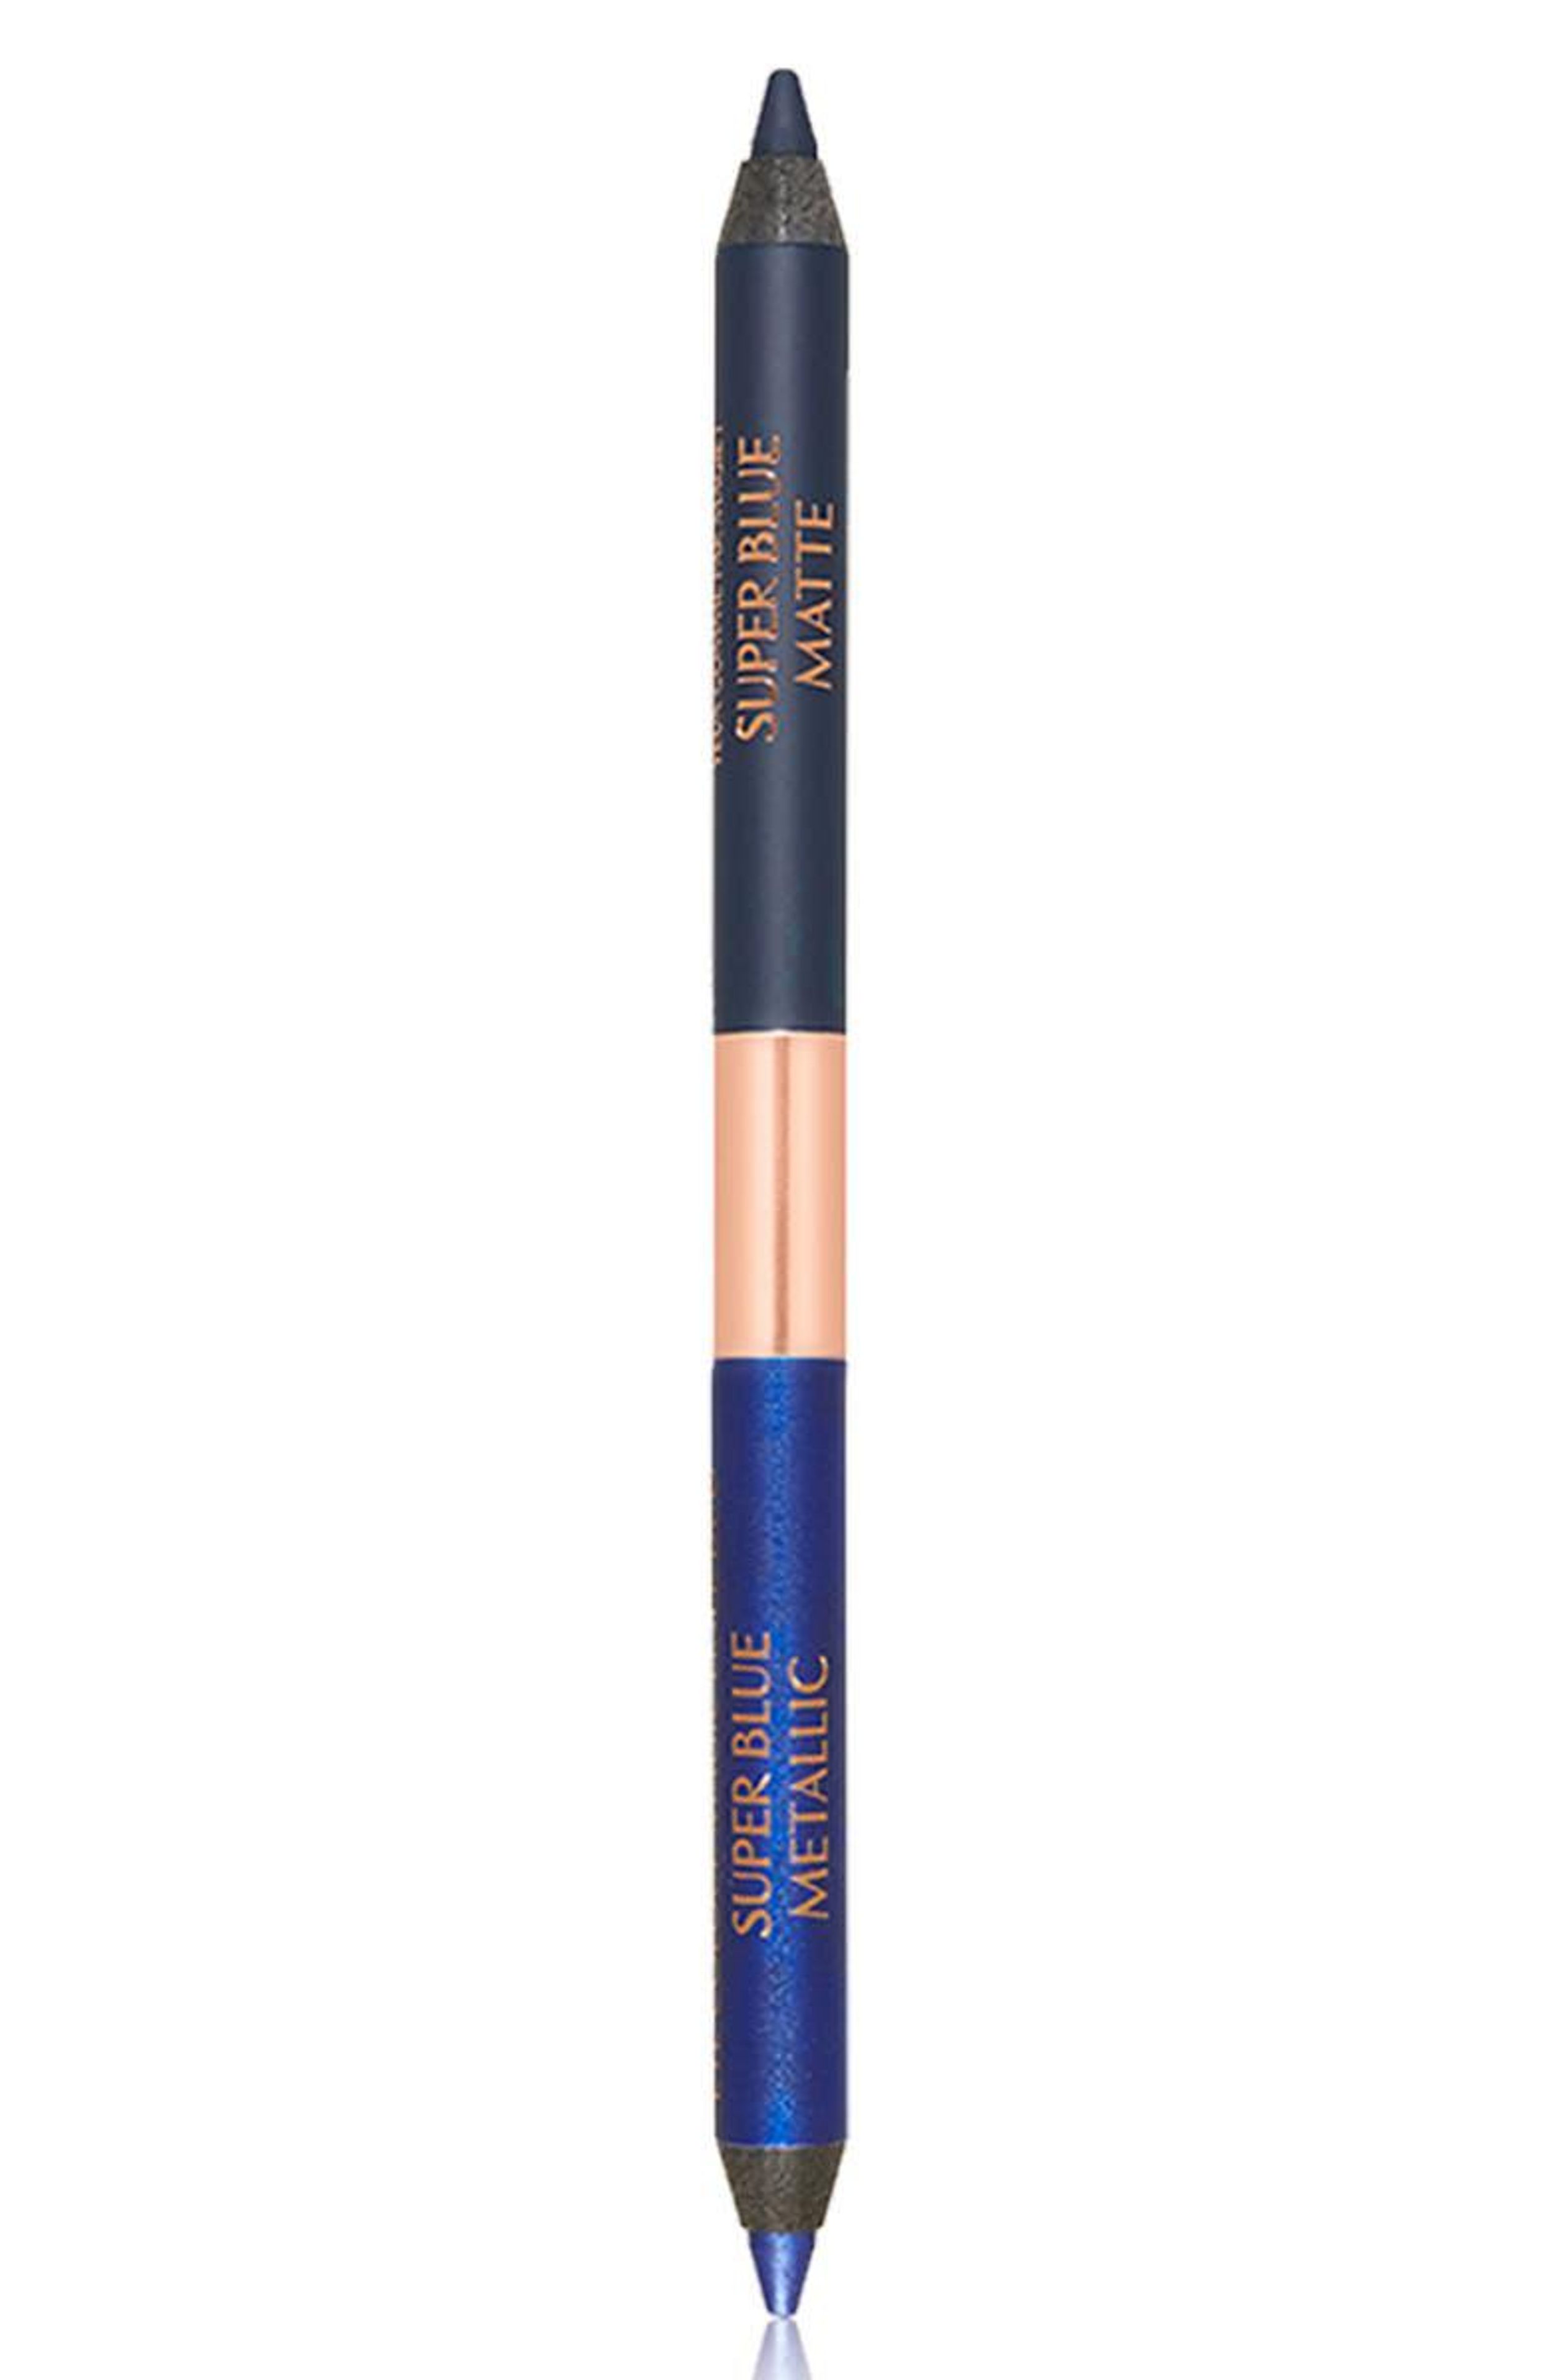 Eye Colour Magic Duo Liner in Super Blue